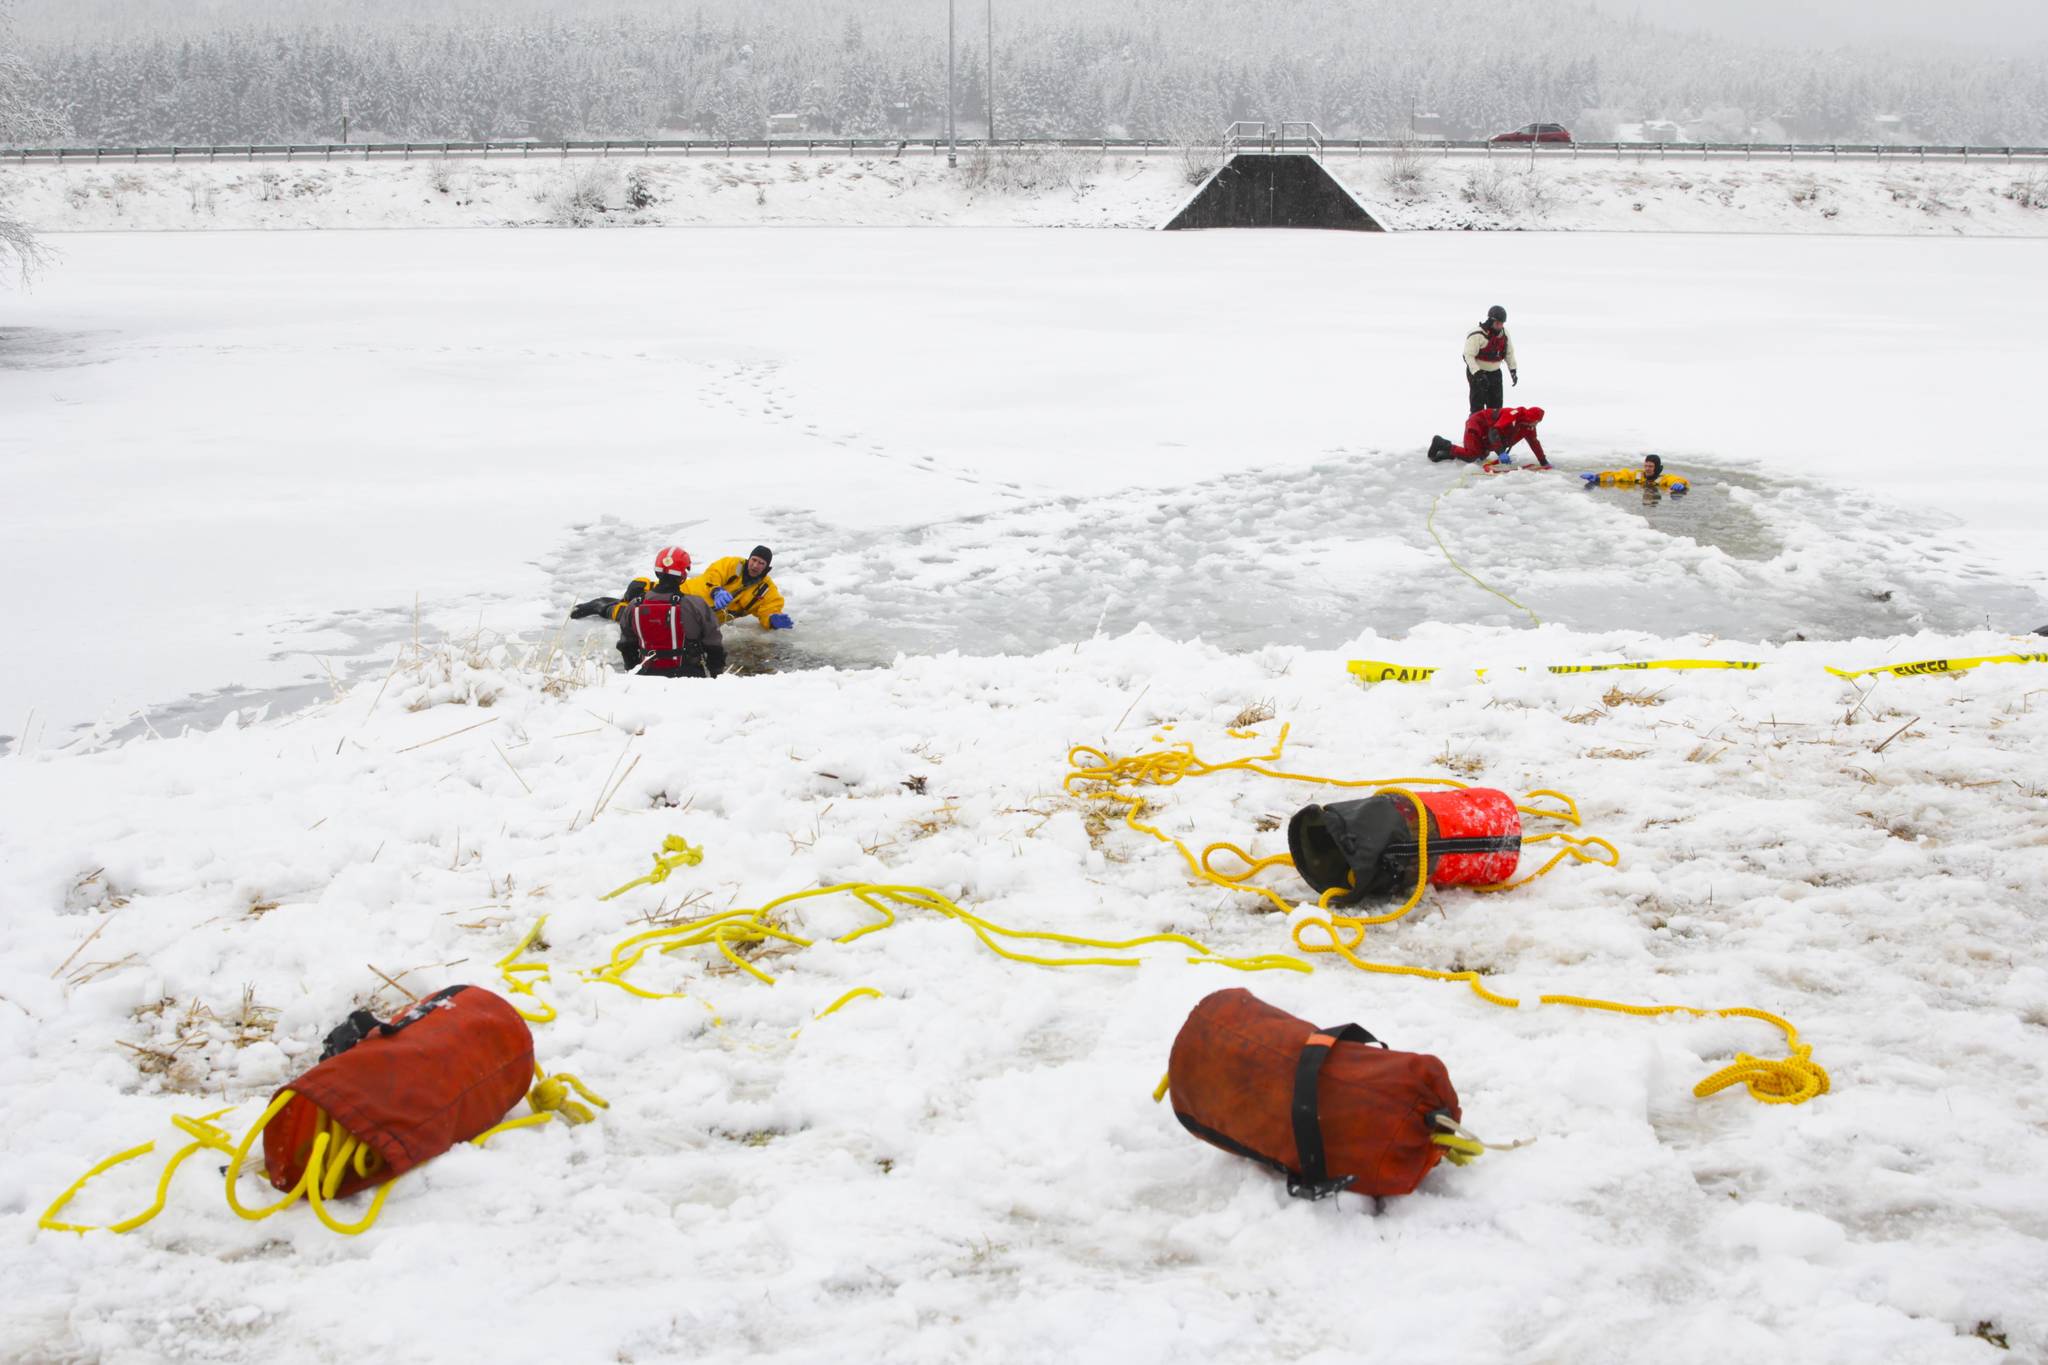 Capital City Fire/Rescue personnel underwent annual ice rescue training at Twin Lakes April 7, 2021. The training occurs in the spring, when the ice is rotted and most dangerous. (Michael S. Lockett / Juneau Empire)